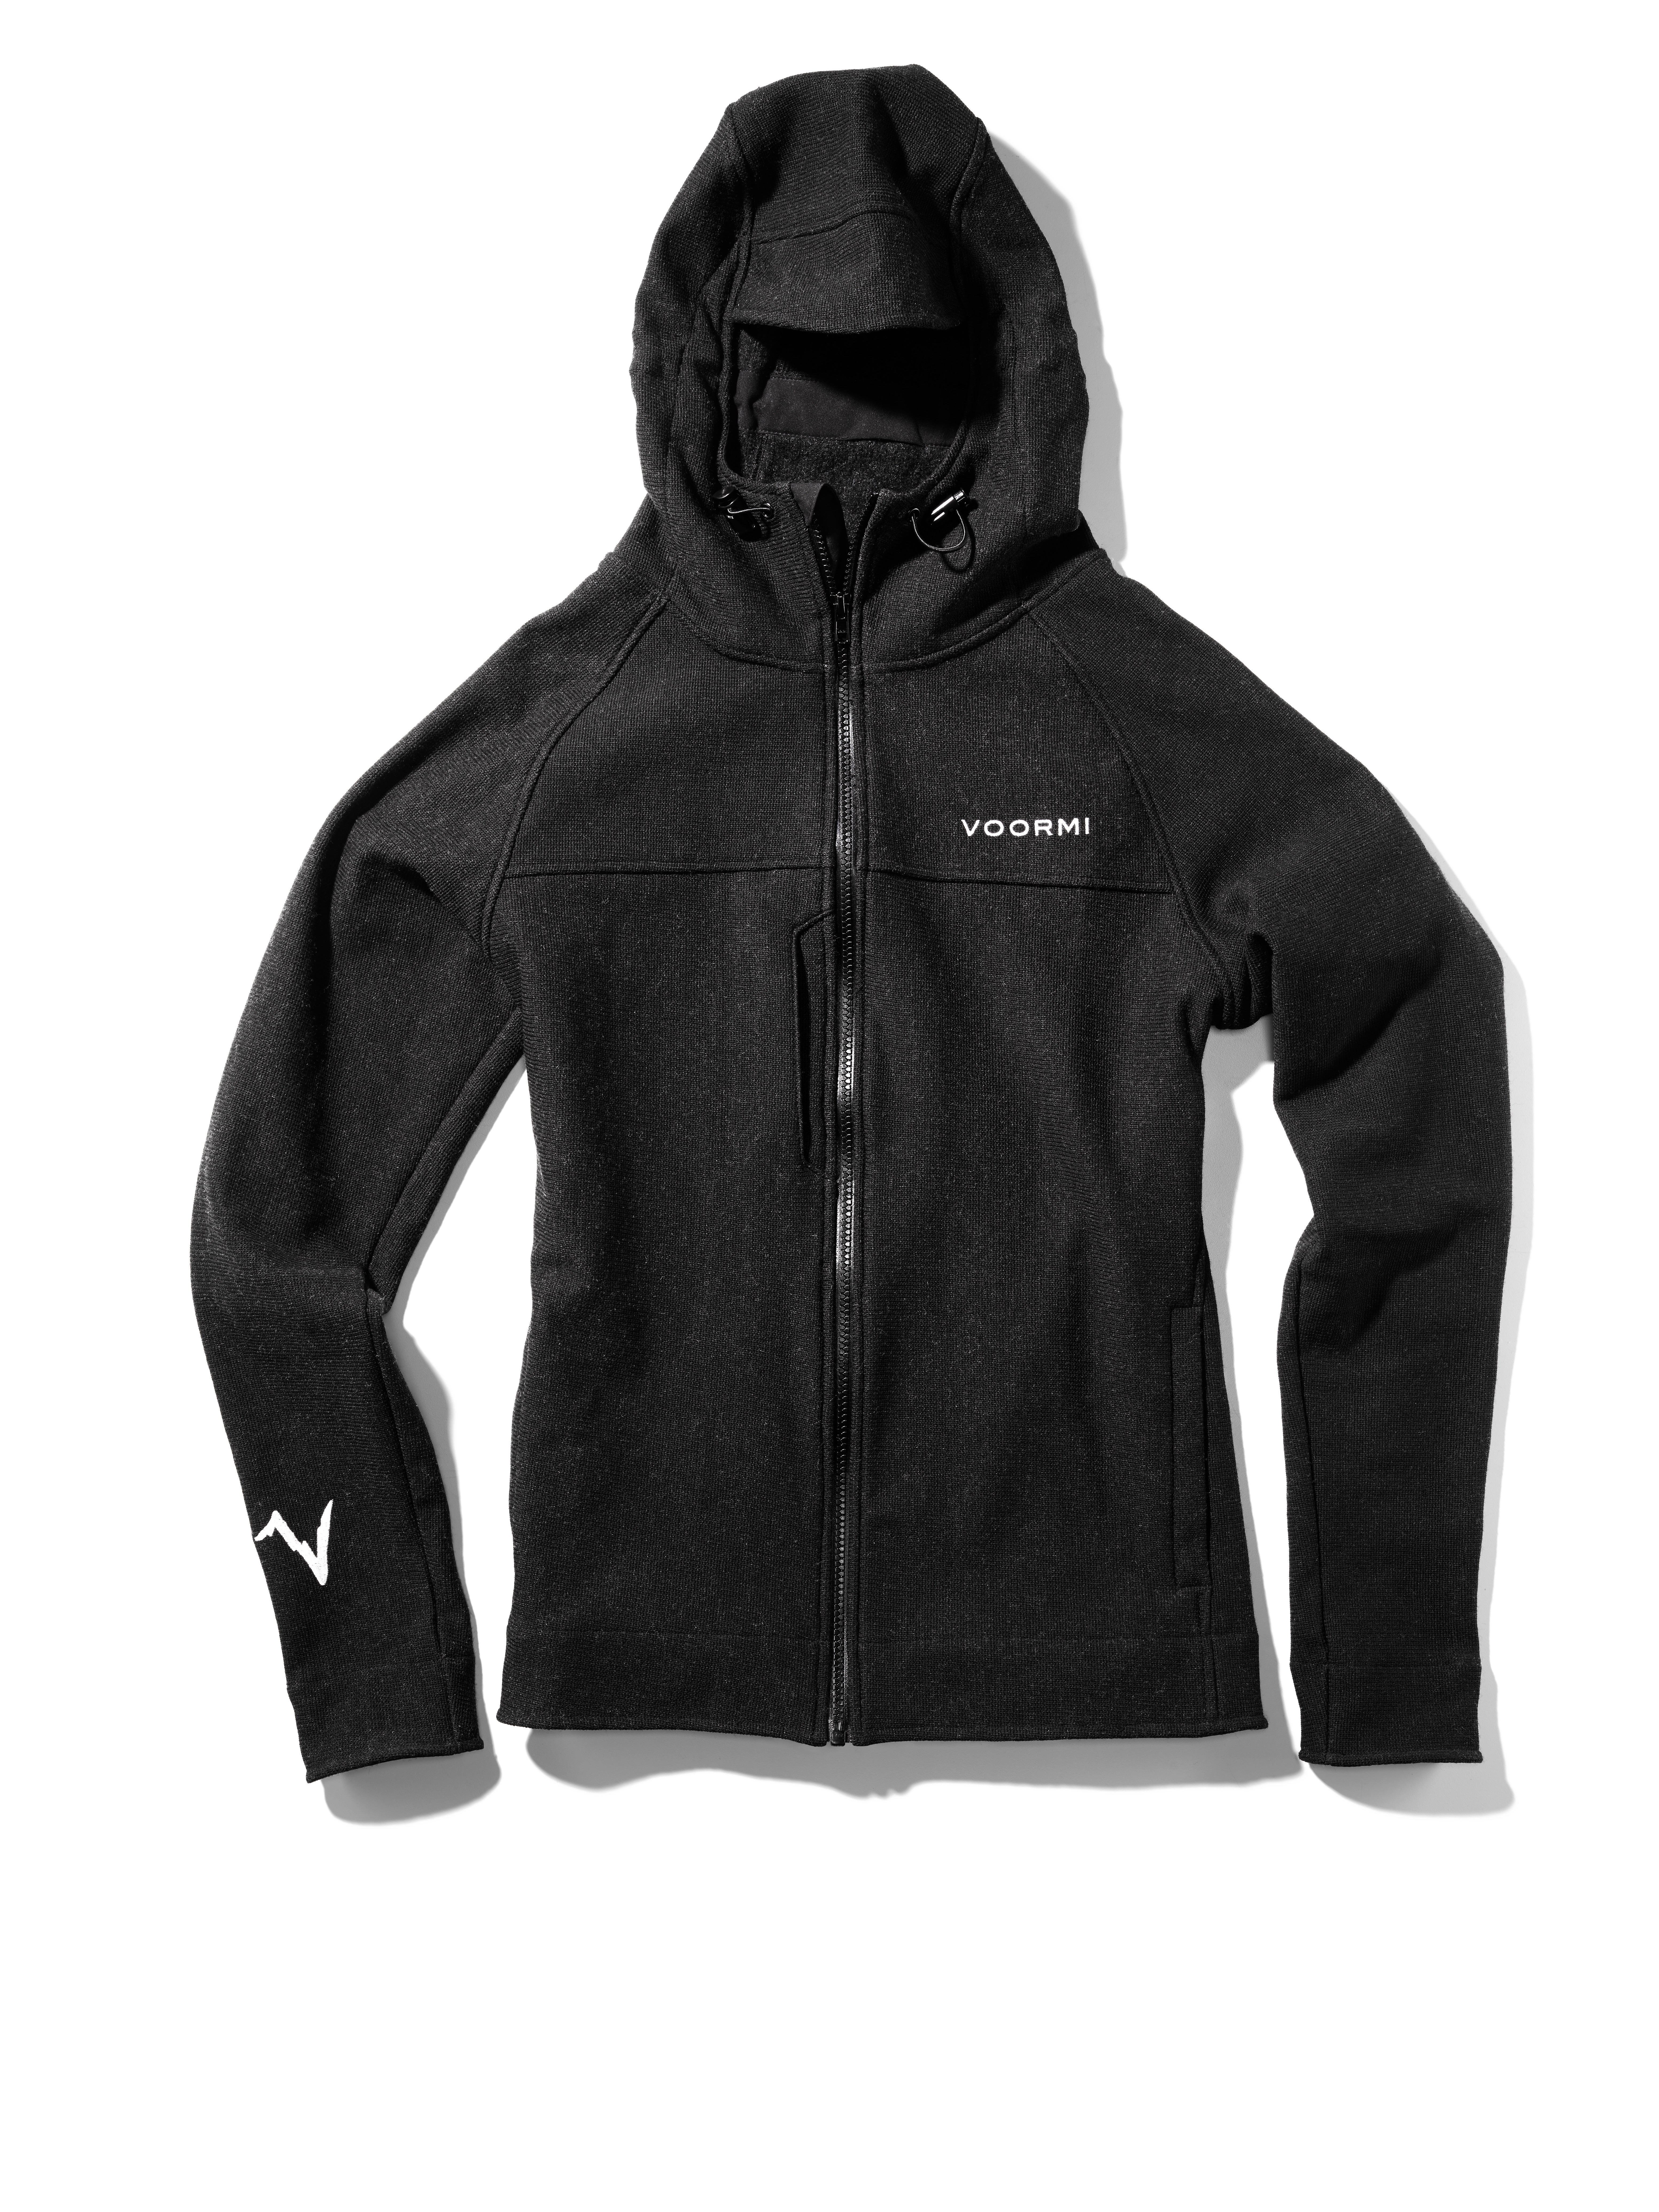 Voormi Fall Line Jacket With Core Construction: The Only Jacket You'll Need